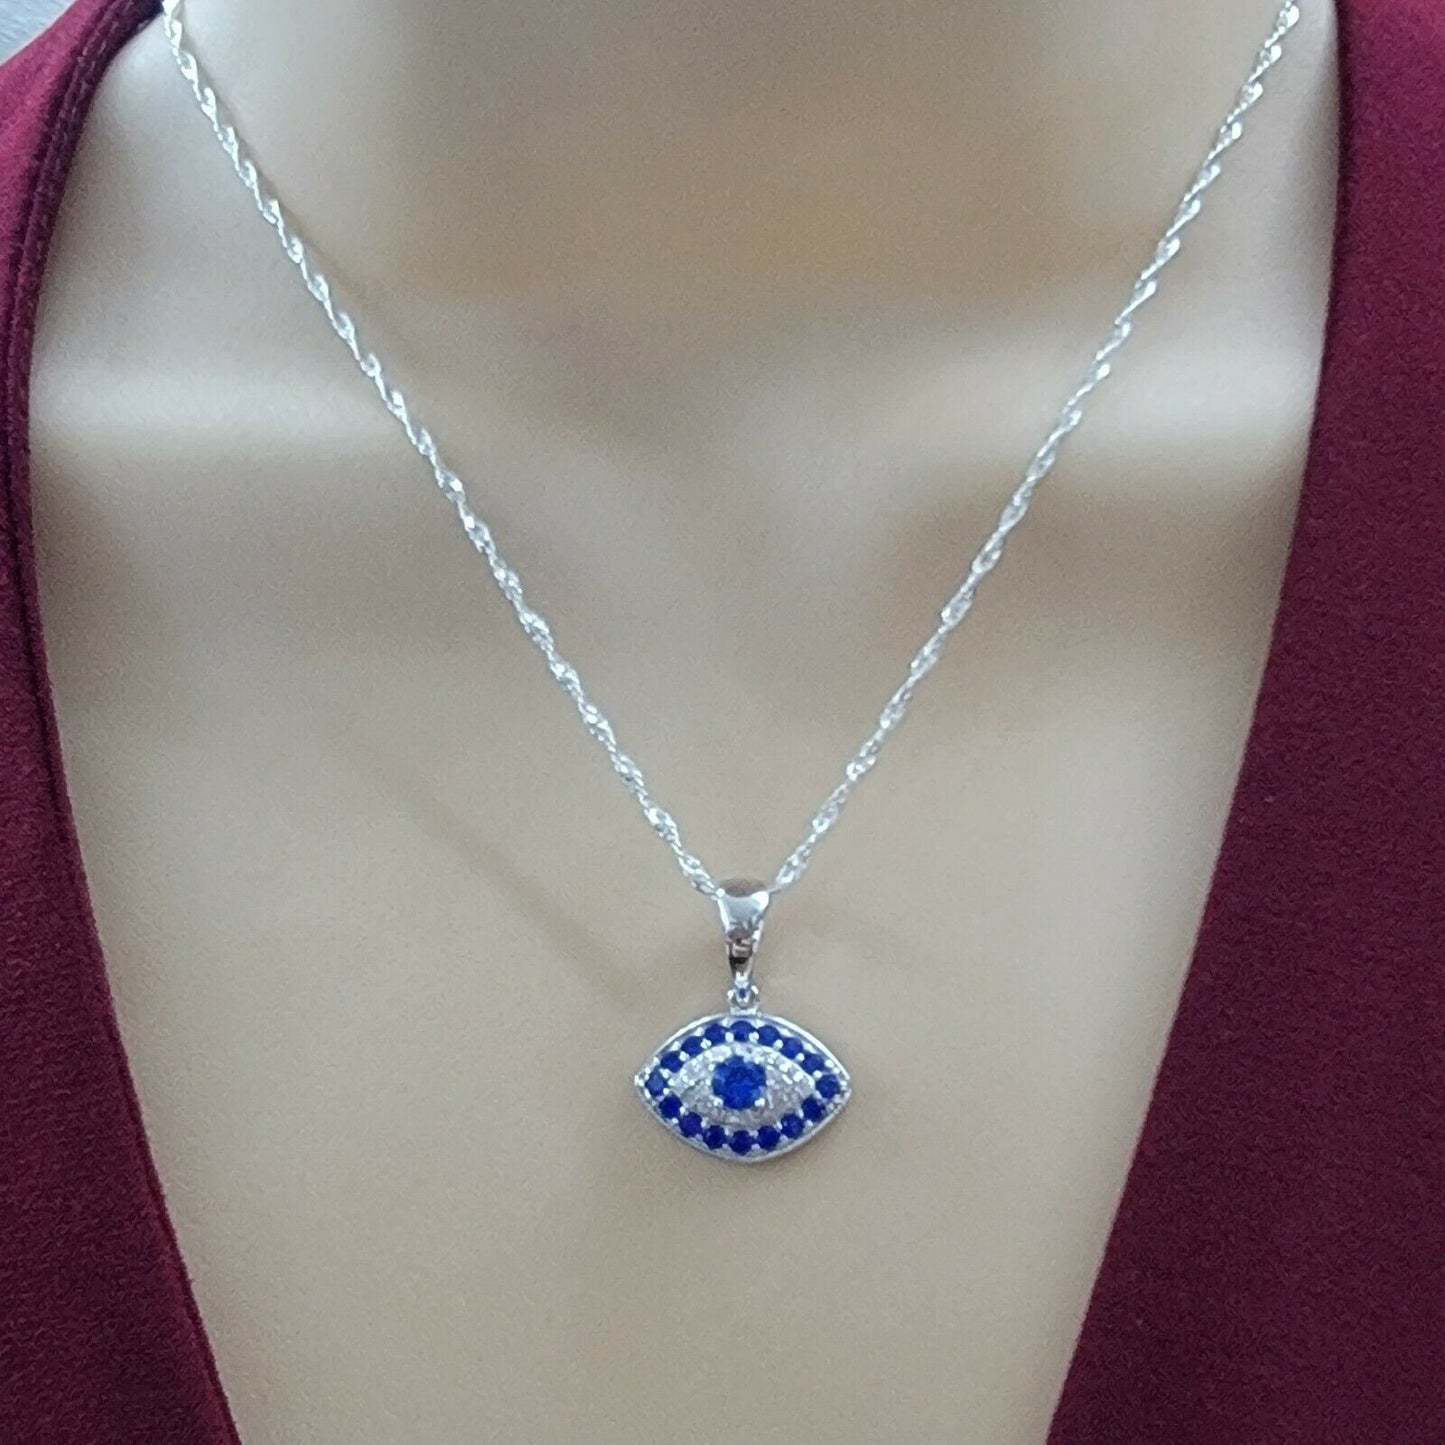 Solid 925 Sterling Silver. CZ Blue Eye Pendant Necklace.